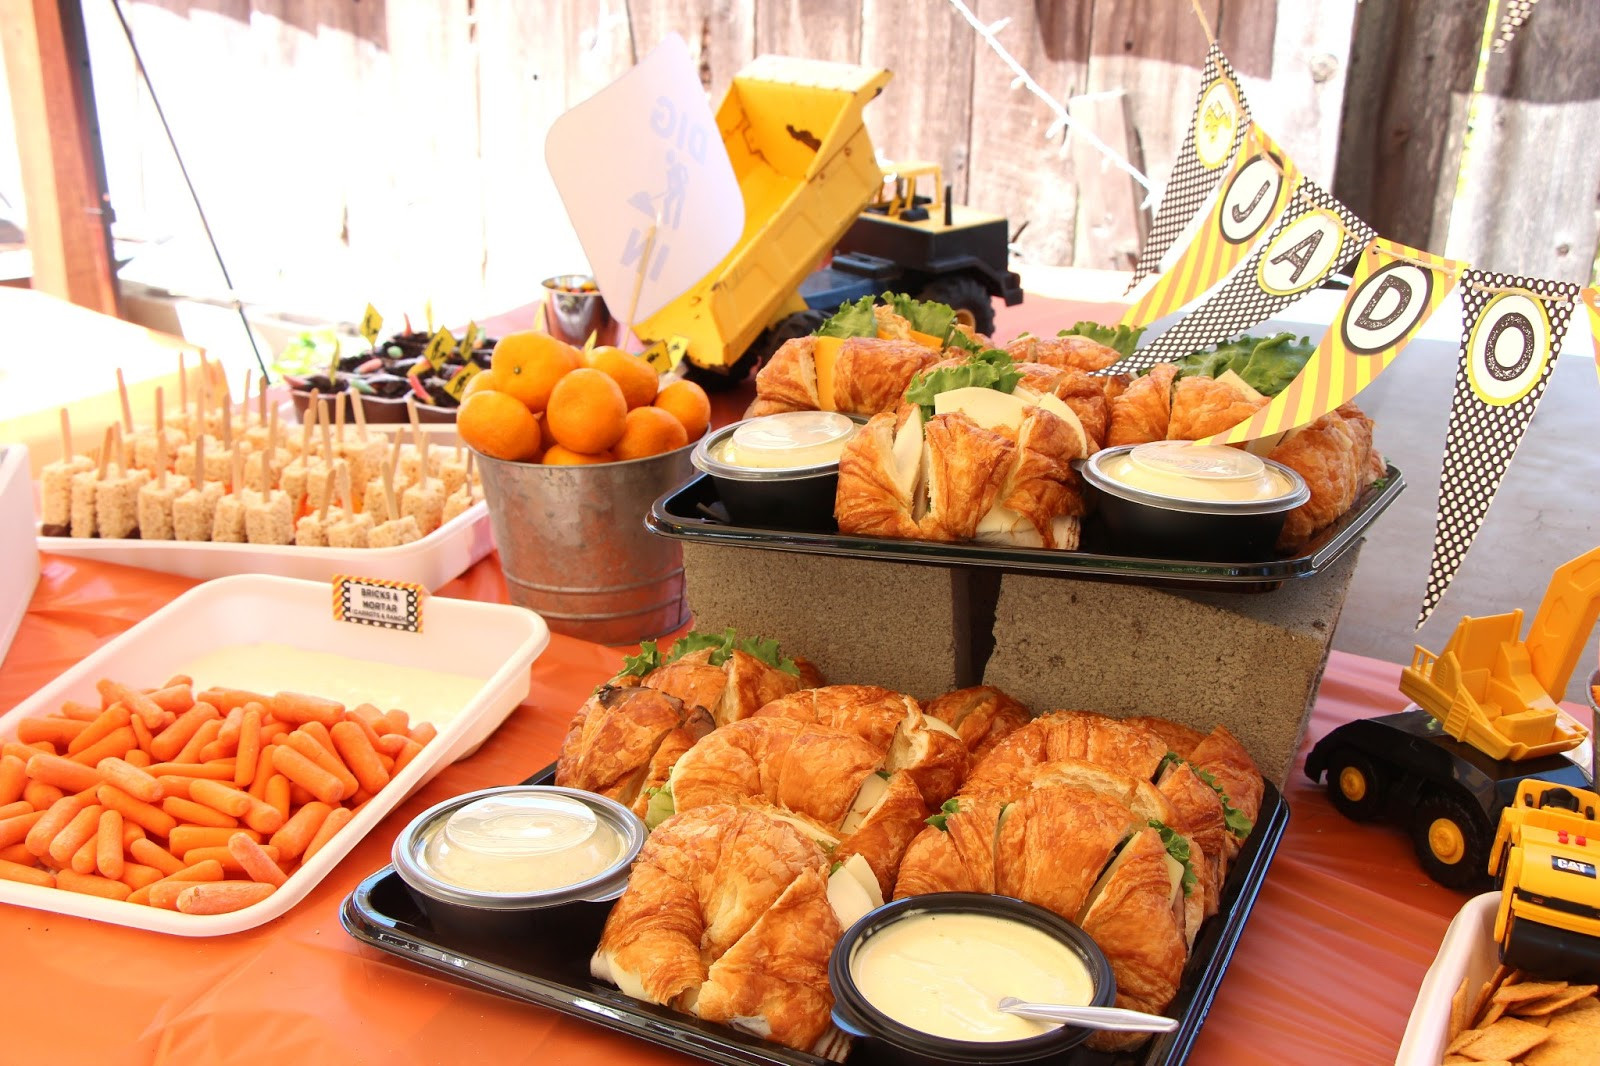 Costco Party Food Ideas
 What a Ride Jadon s Construction Themed 3rd Birthday Party